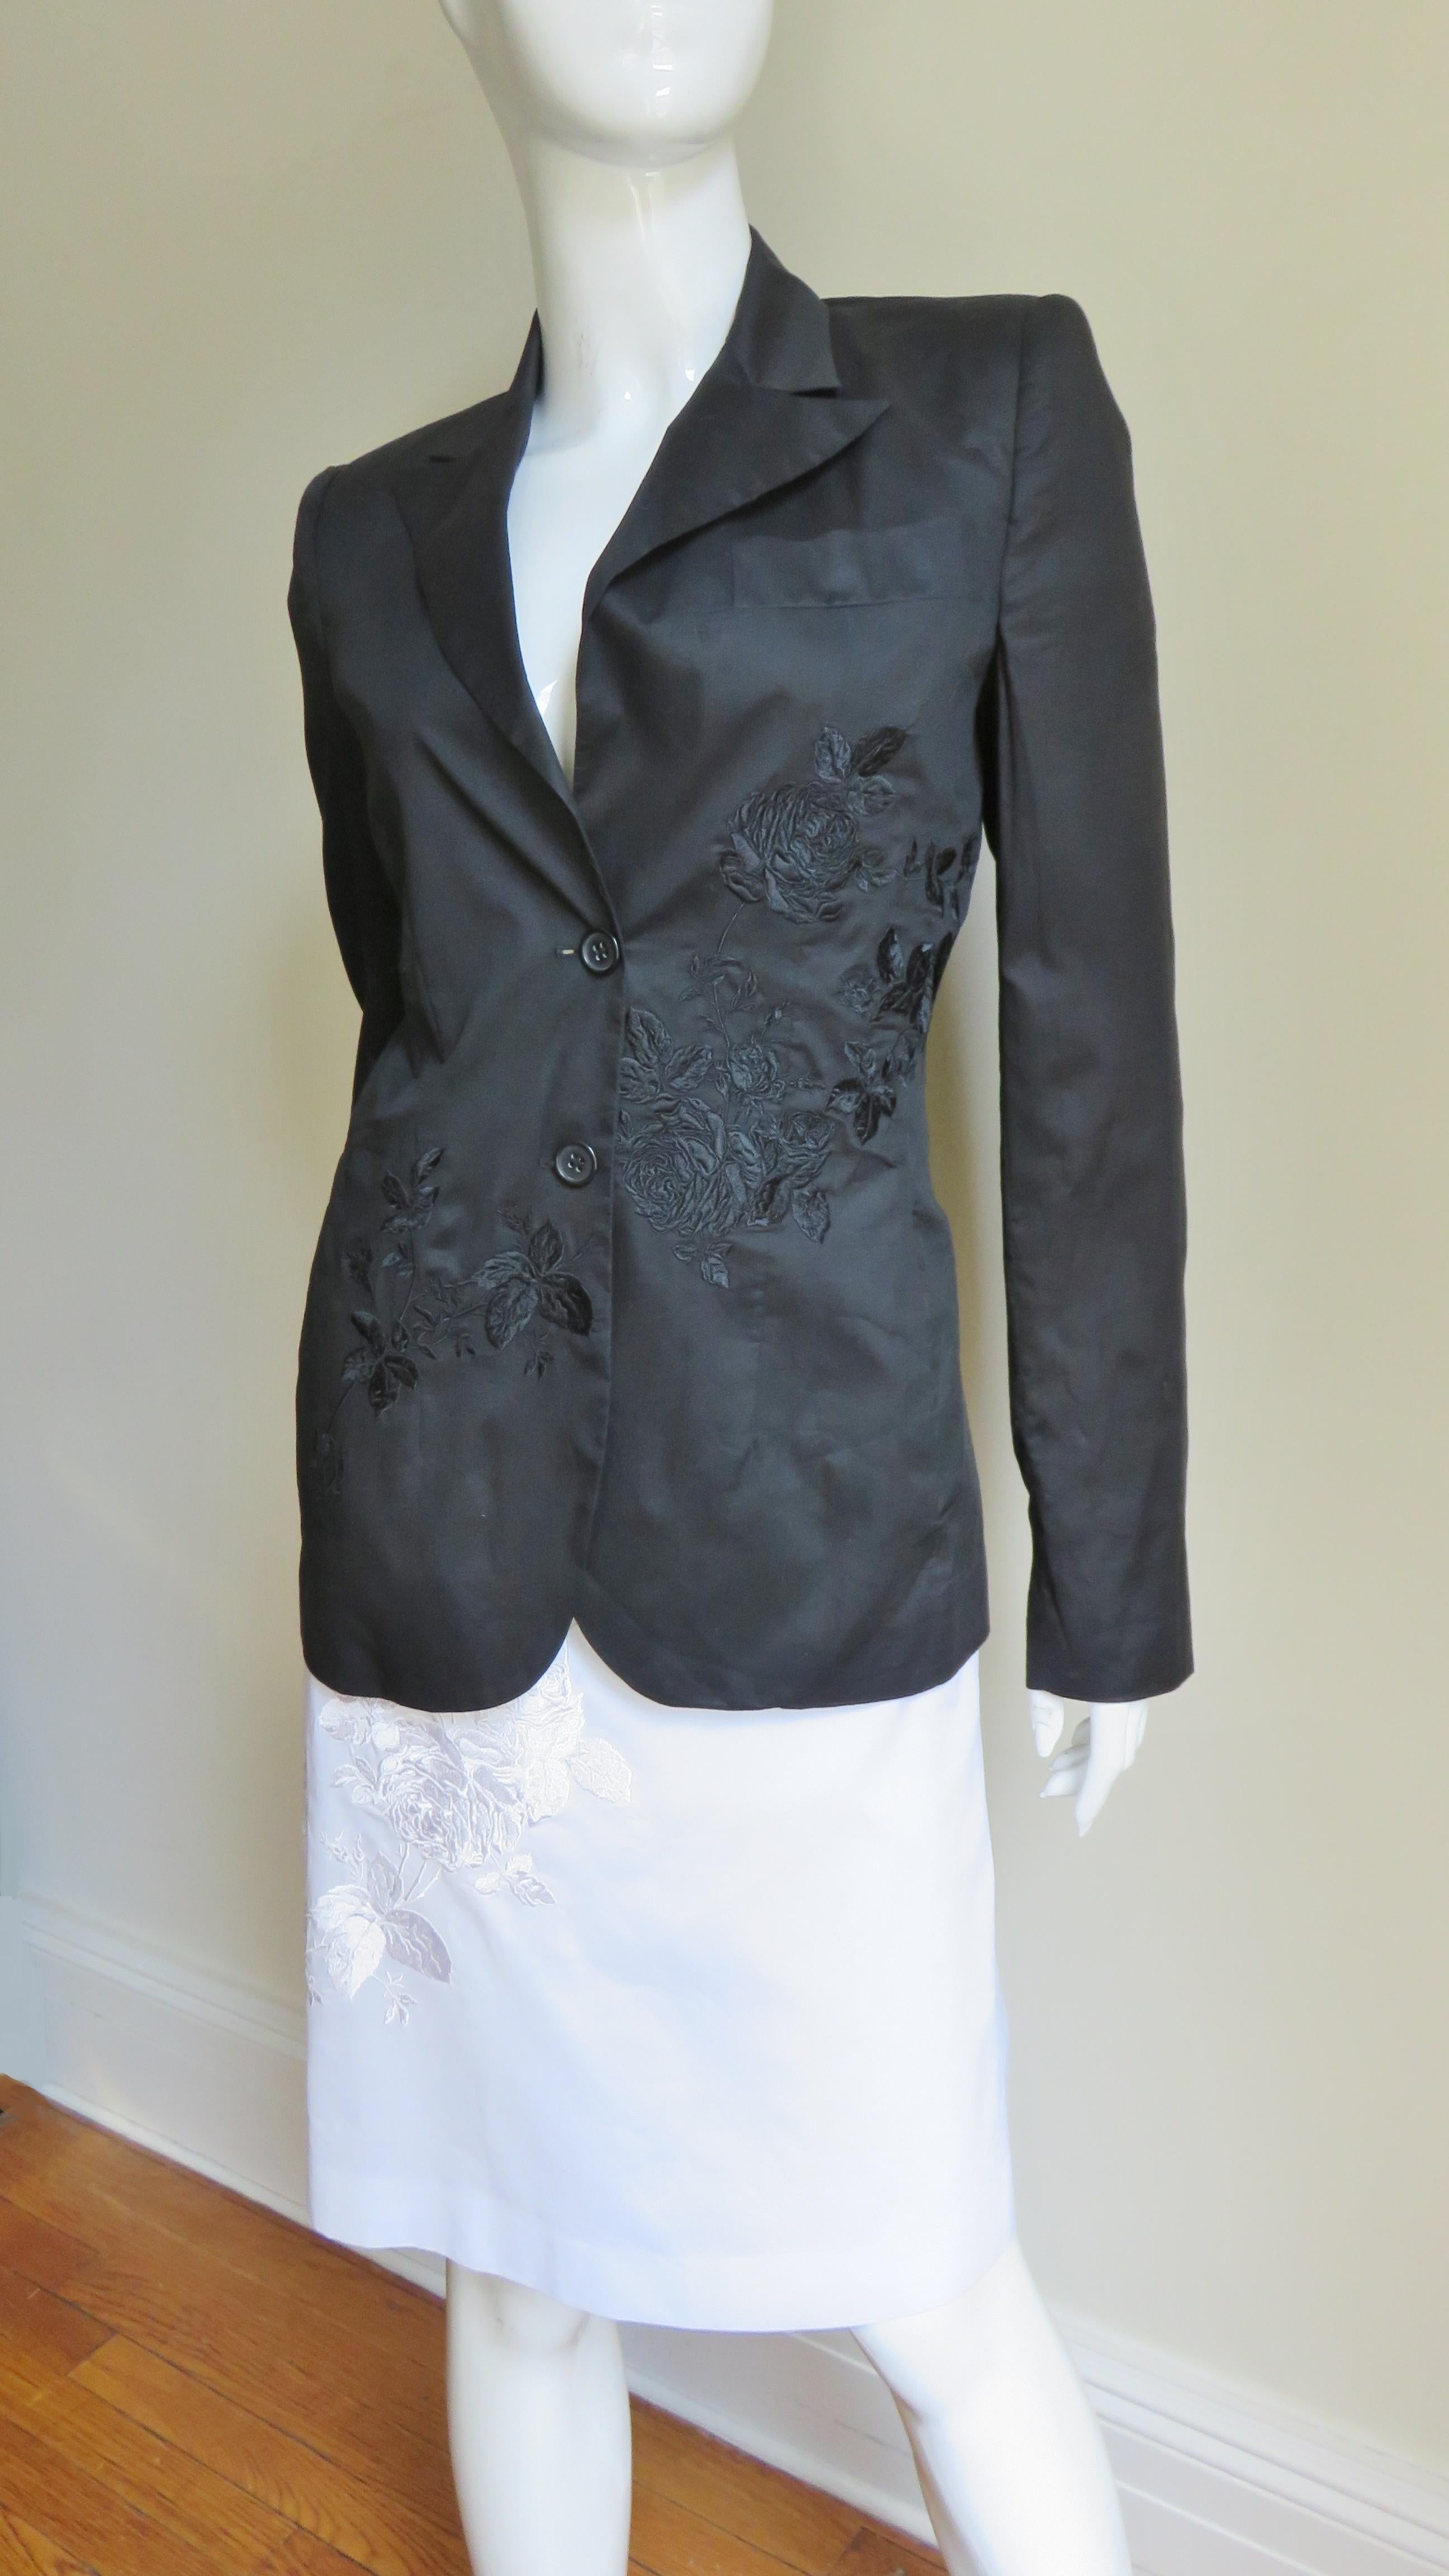 Women's Alexander McQueen New S/S 2002 Three Piece Skirt Suit with Intricate Embroidery For Sale